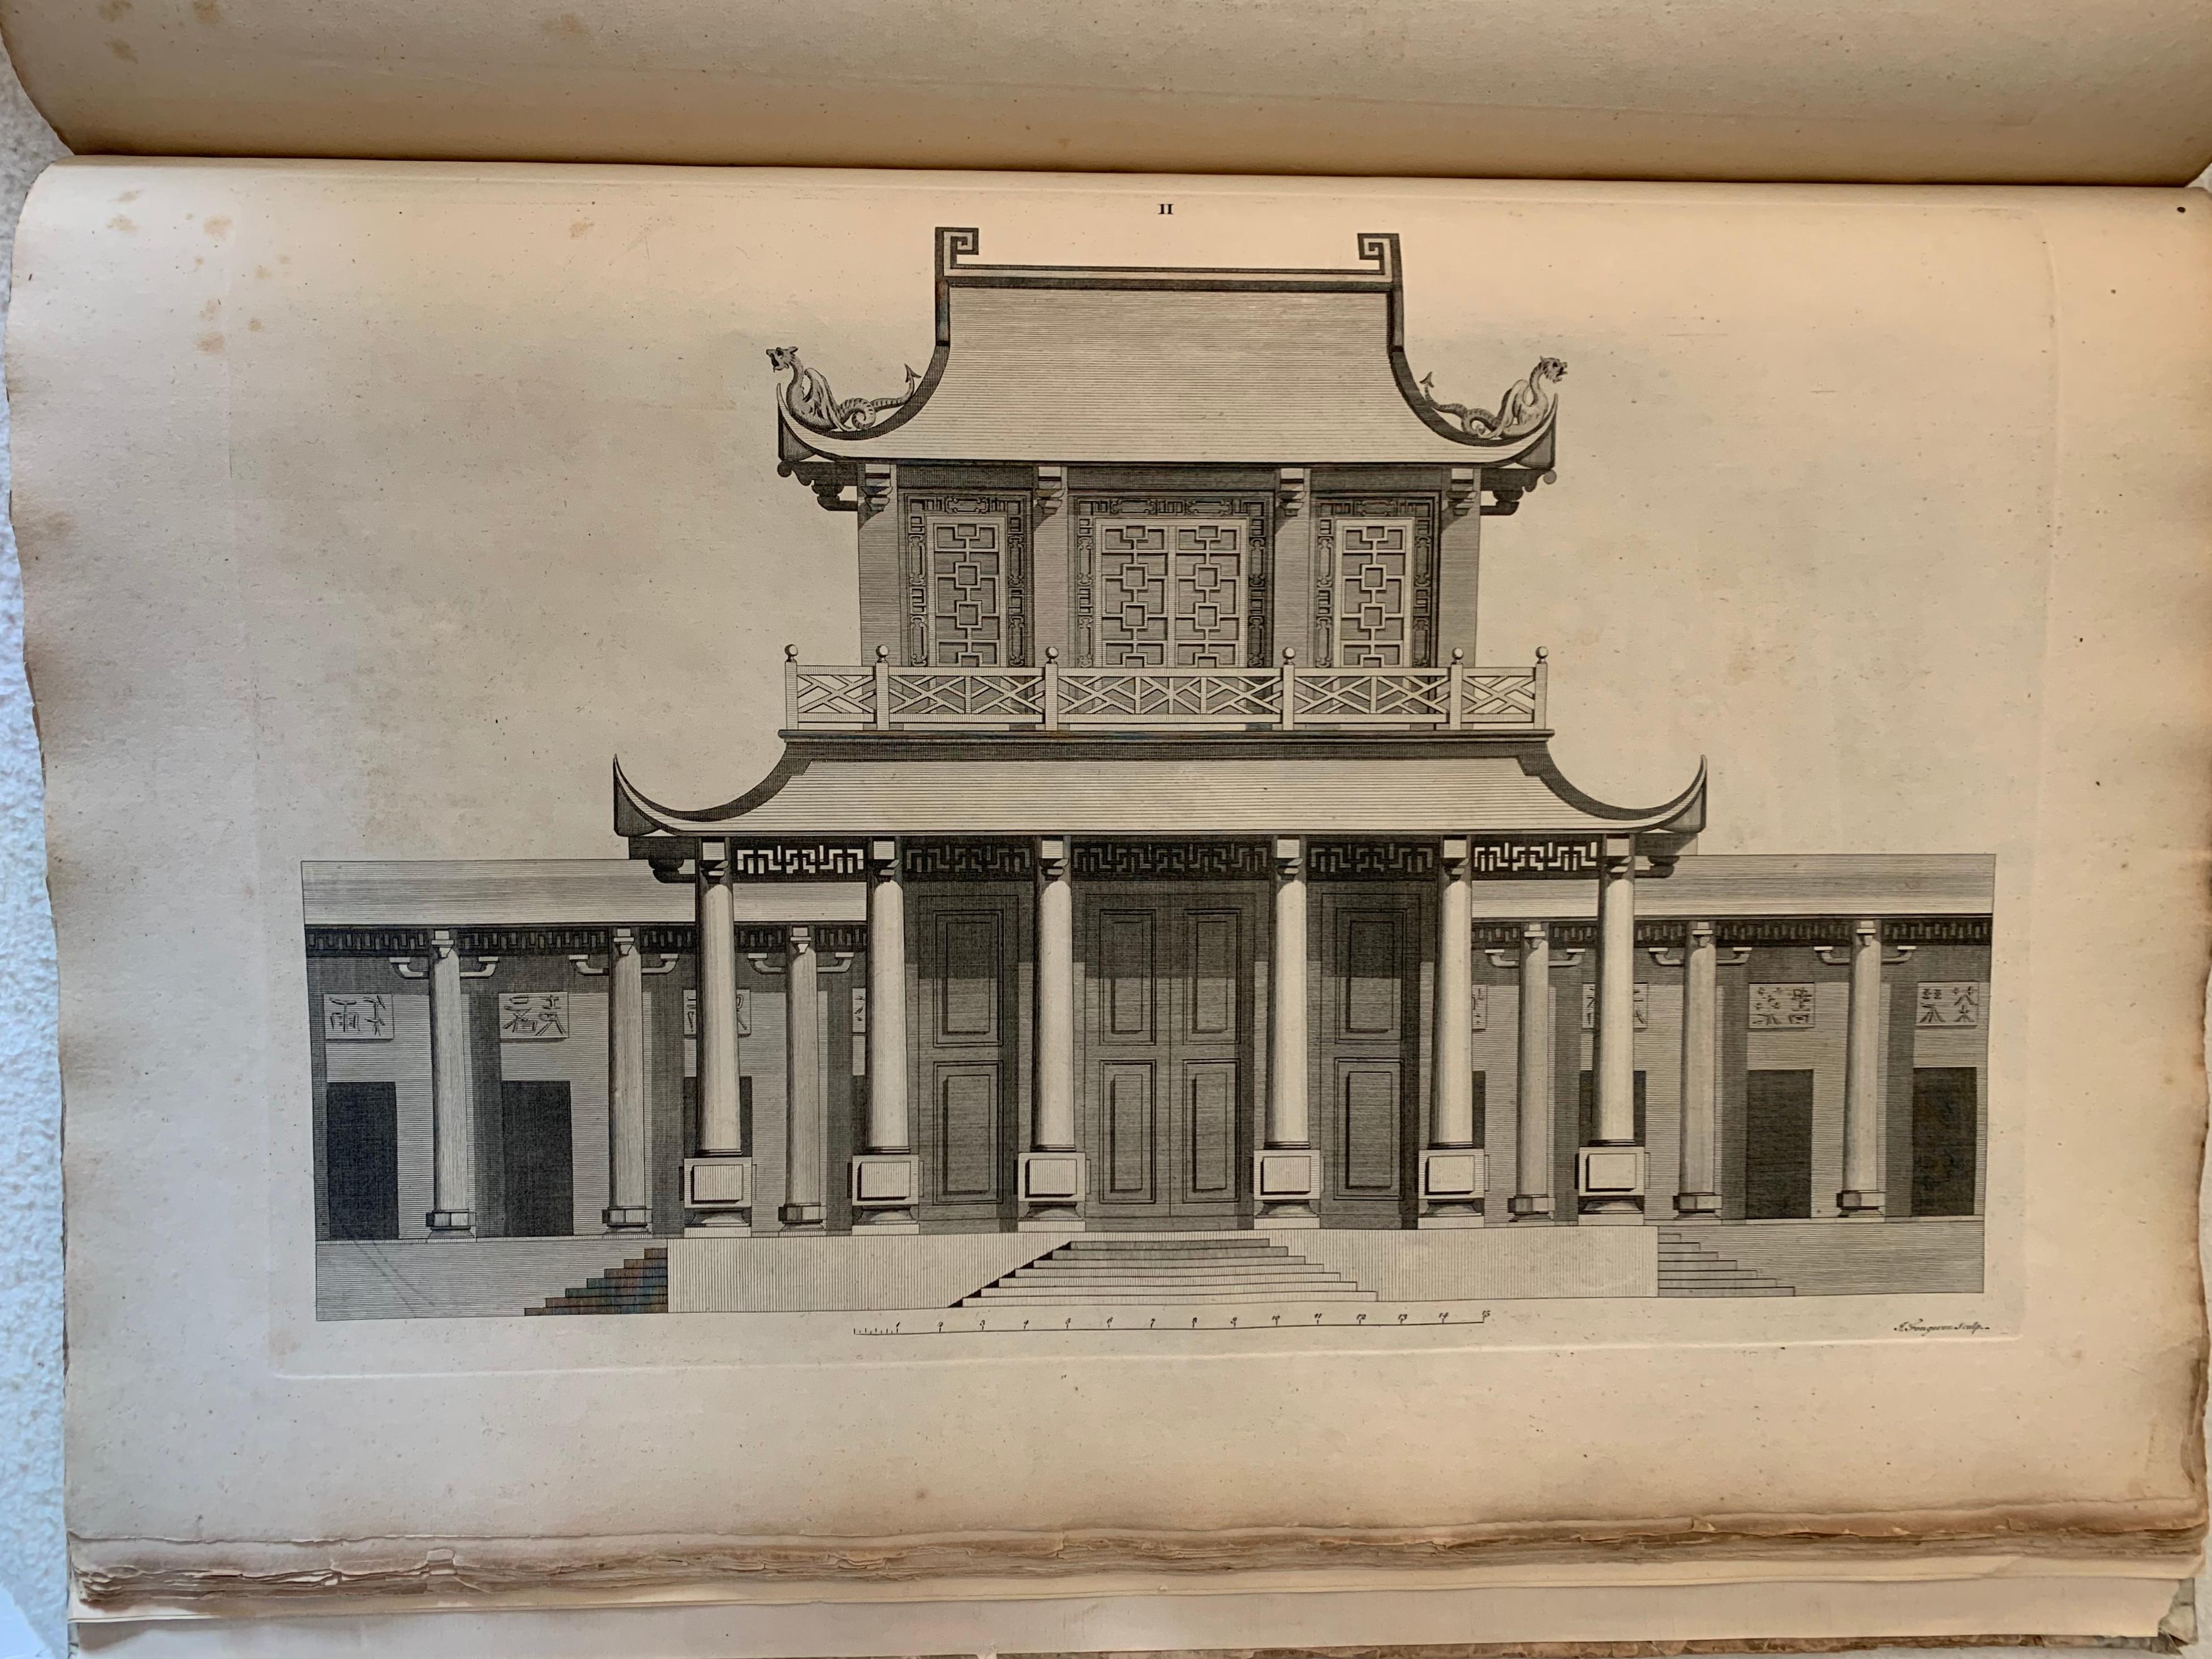 Chambers, Sir William, Designs of Chinese Buildings, Furniture, Dresses Etc For Sale 1